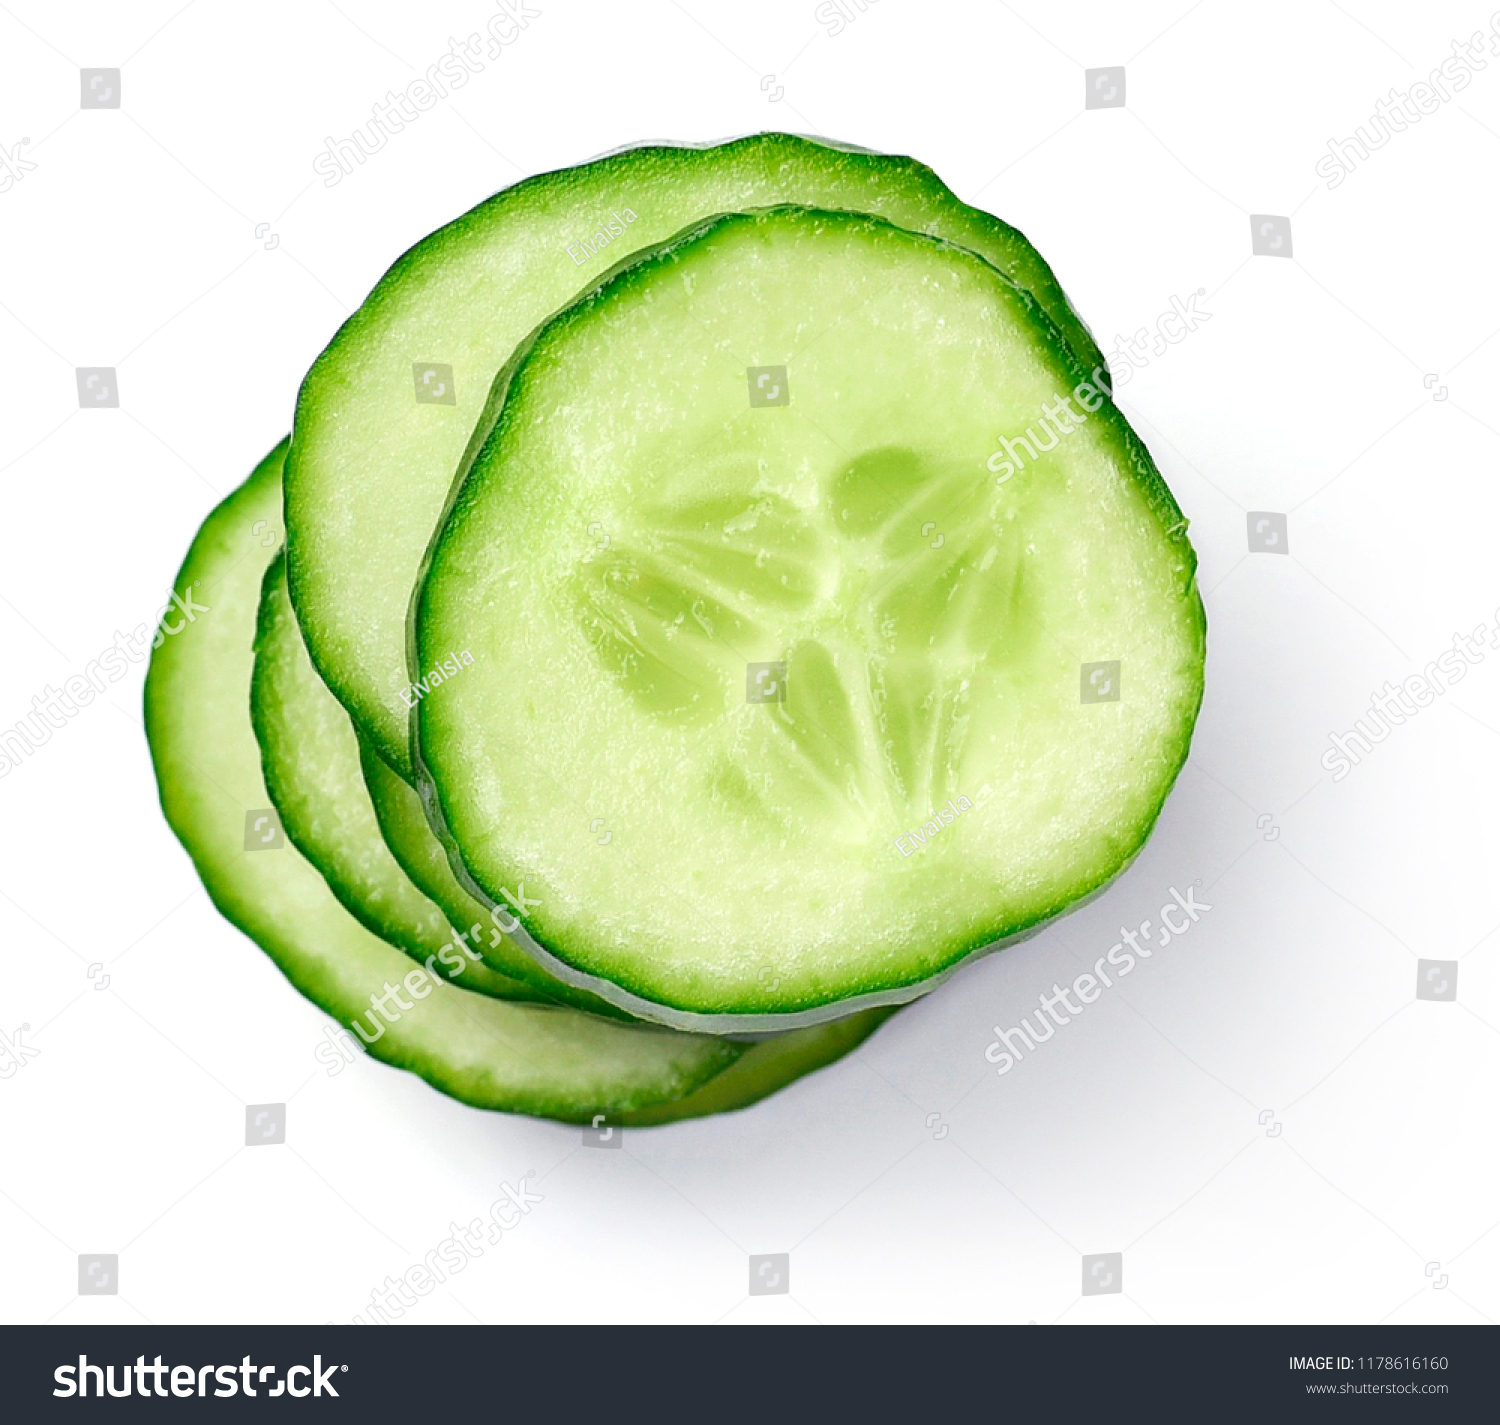 Fresh cucumber slices, isolated on white background. Close up shot of cucumber, arrangement or pile. #1178616160